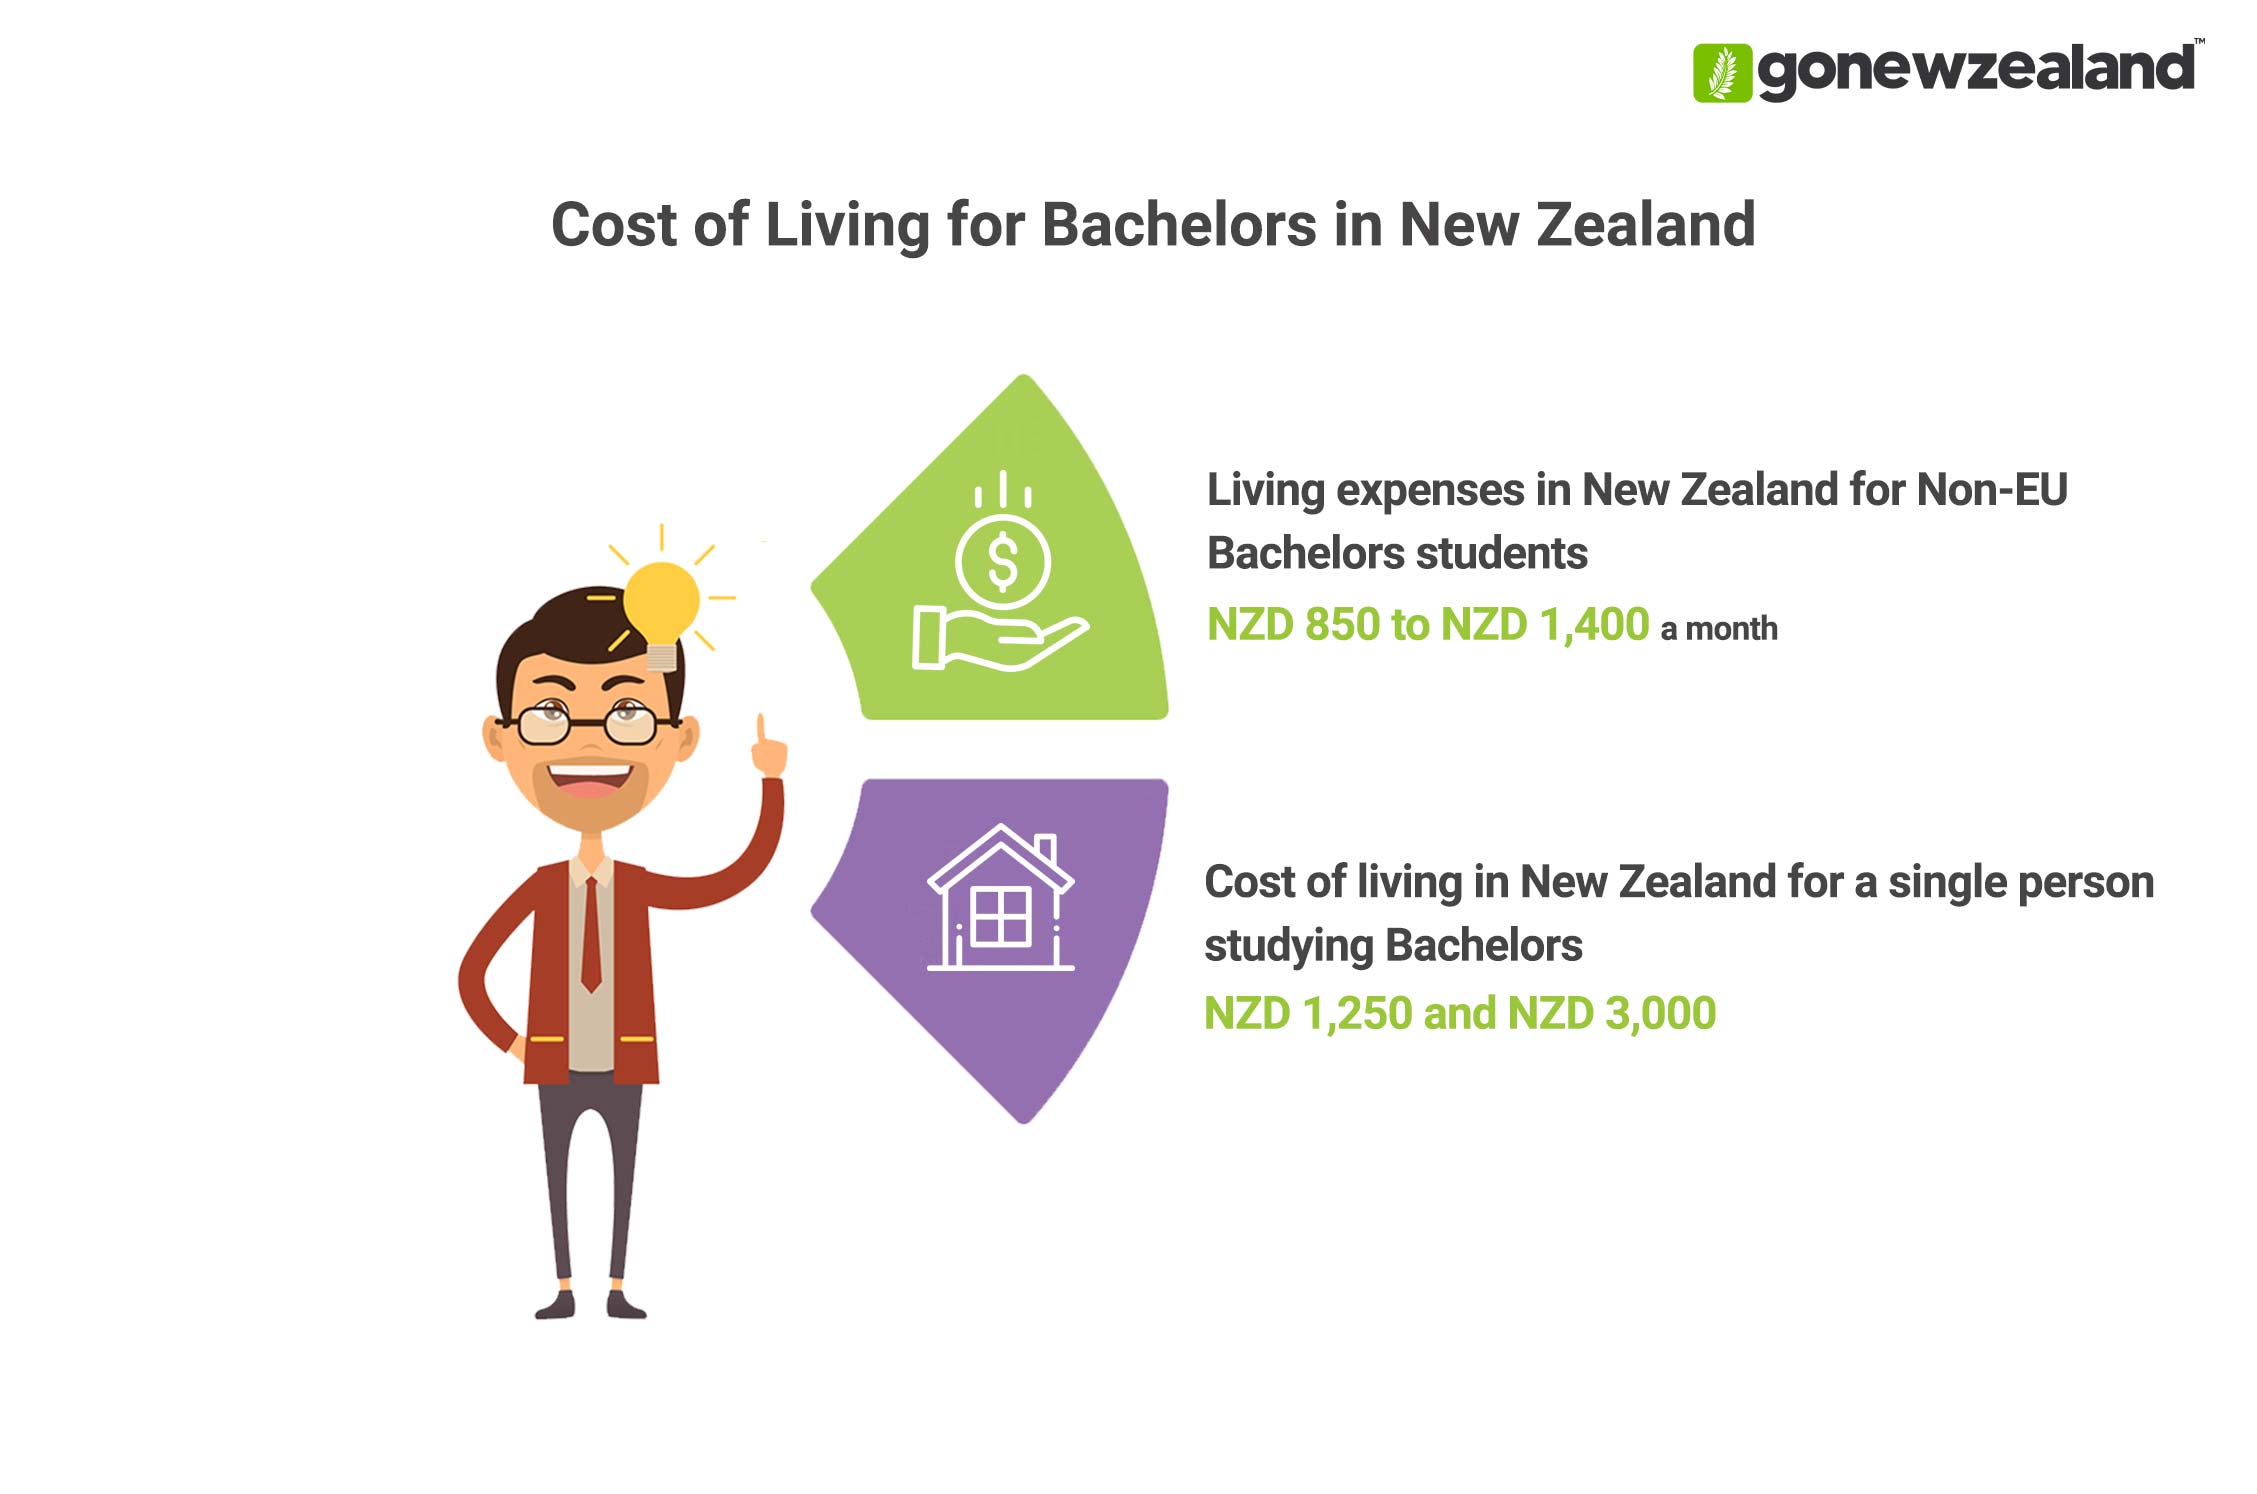 Bachelors in New Zealand Cost